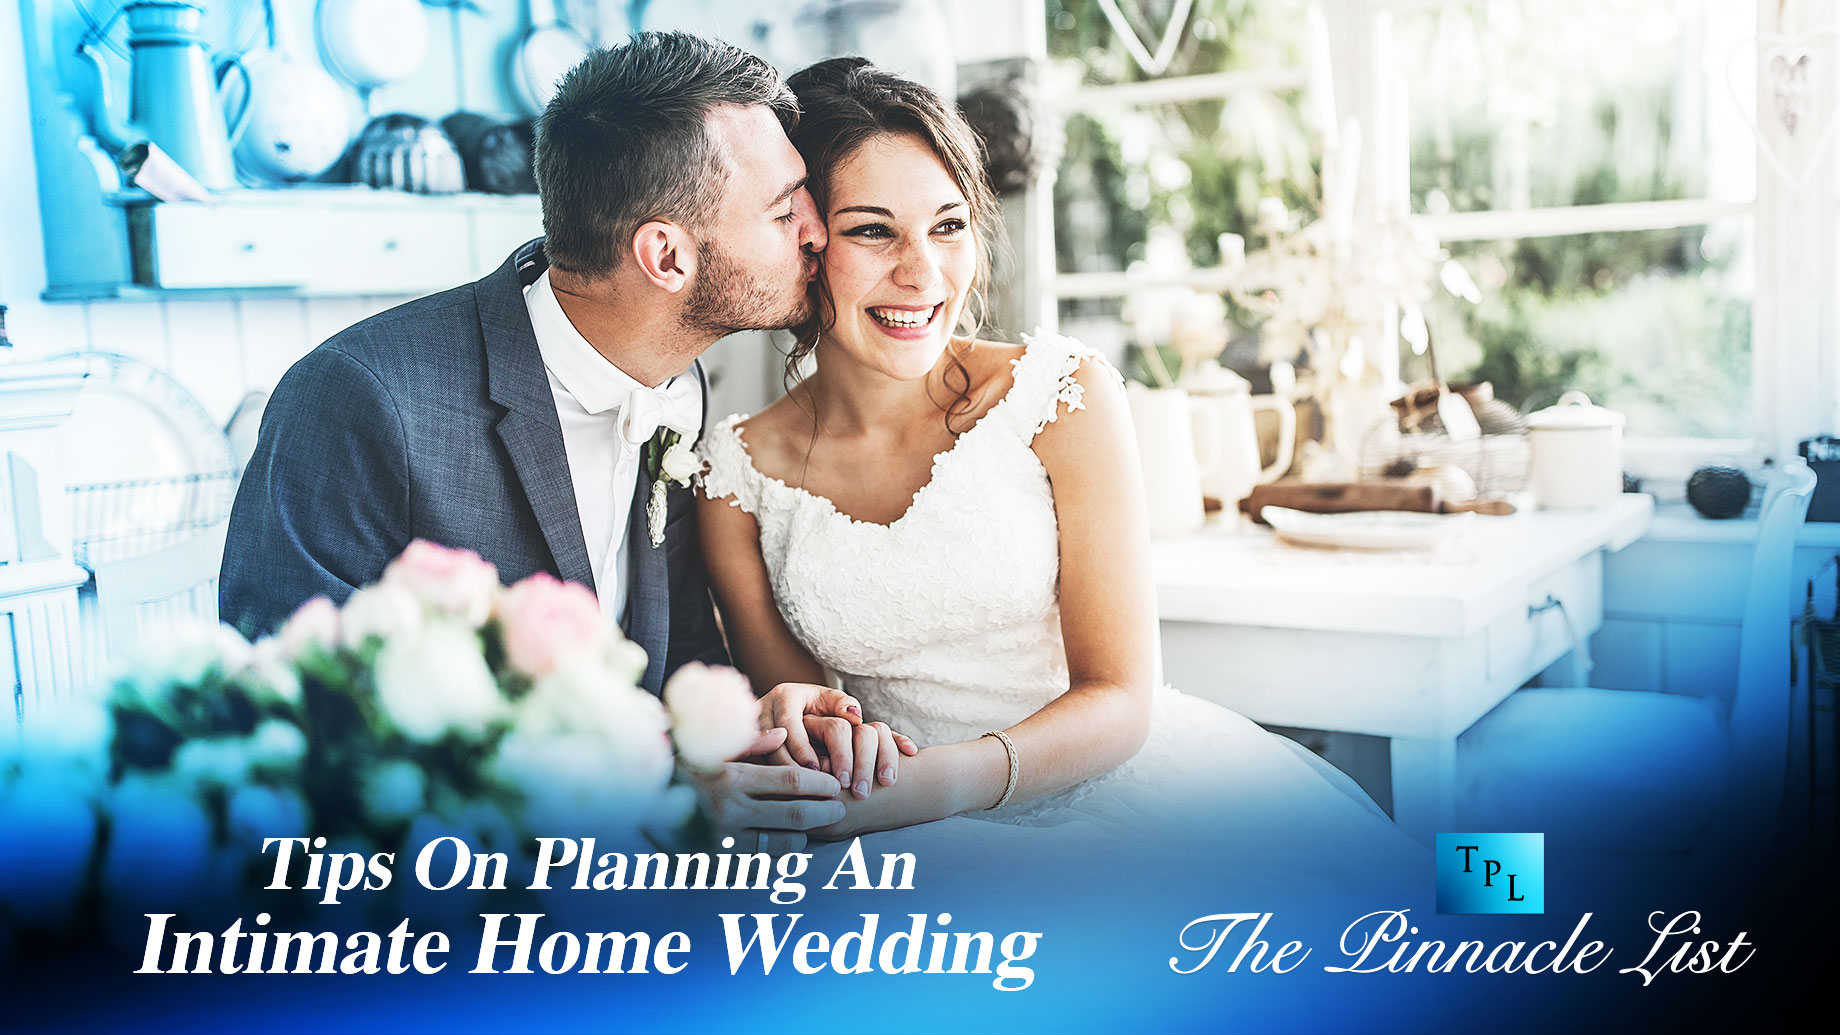 Tips On Planning An Intimate Home Wedding